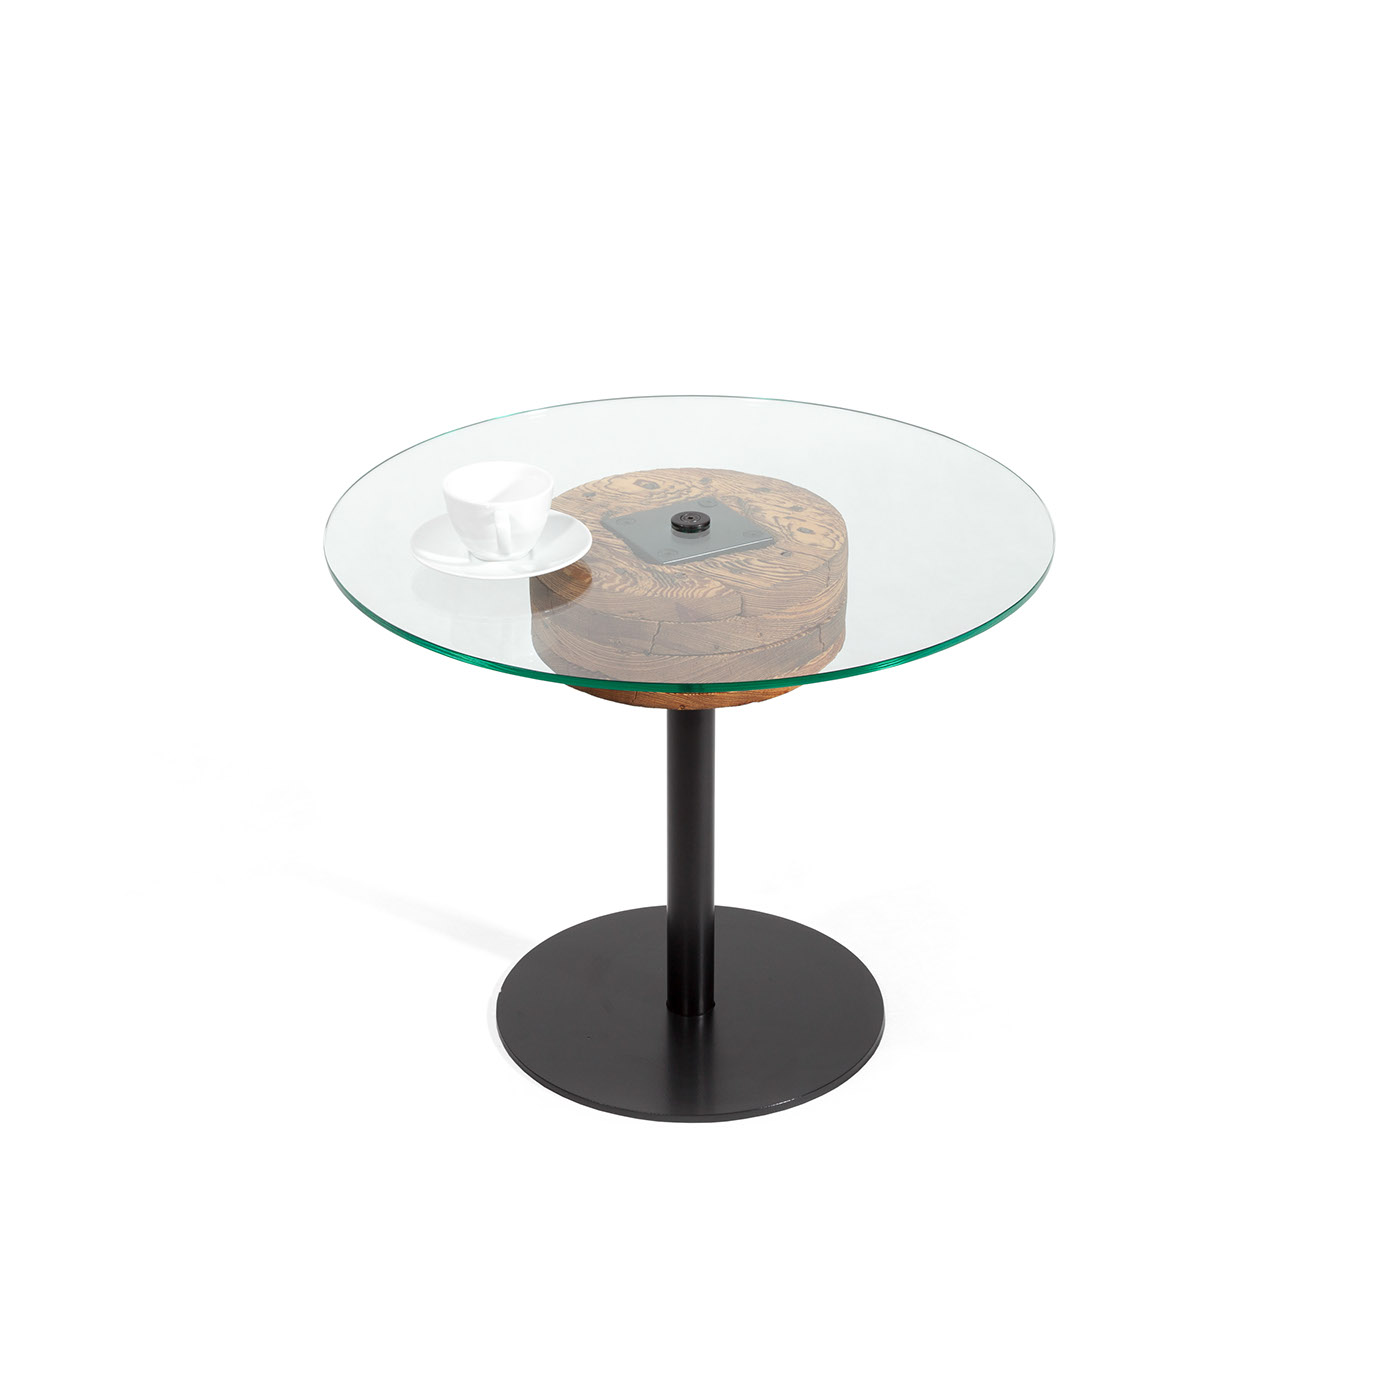 photoshoot packshots furniture coffee table products steel glass Isolated background White